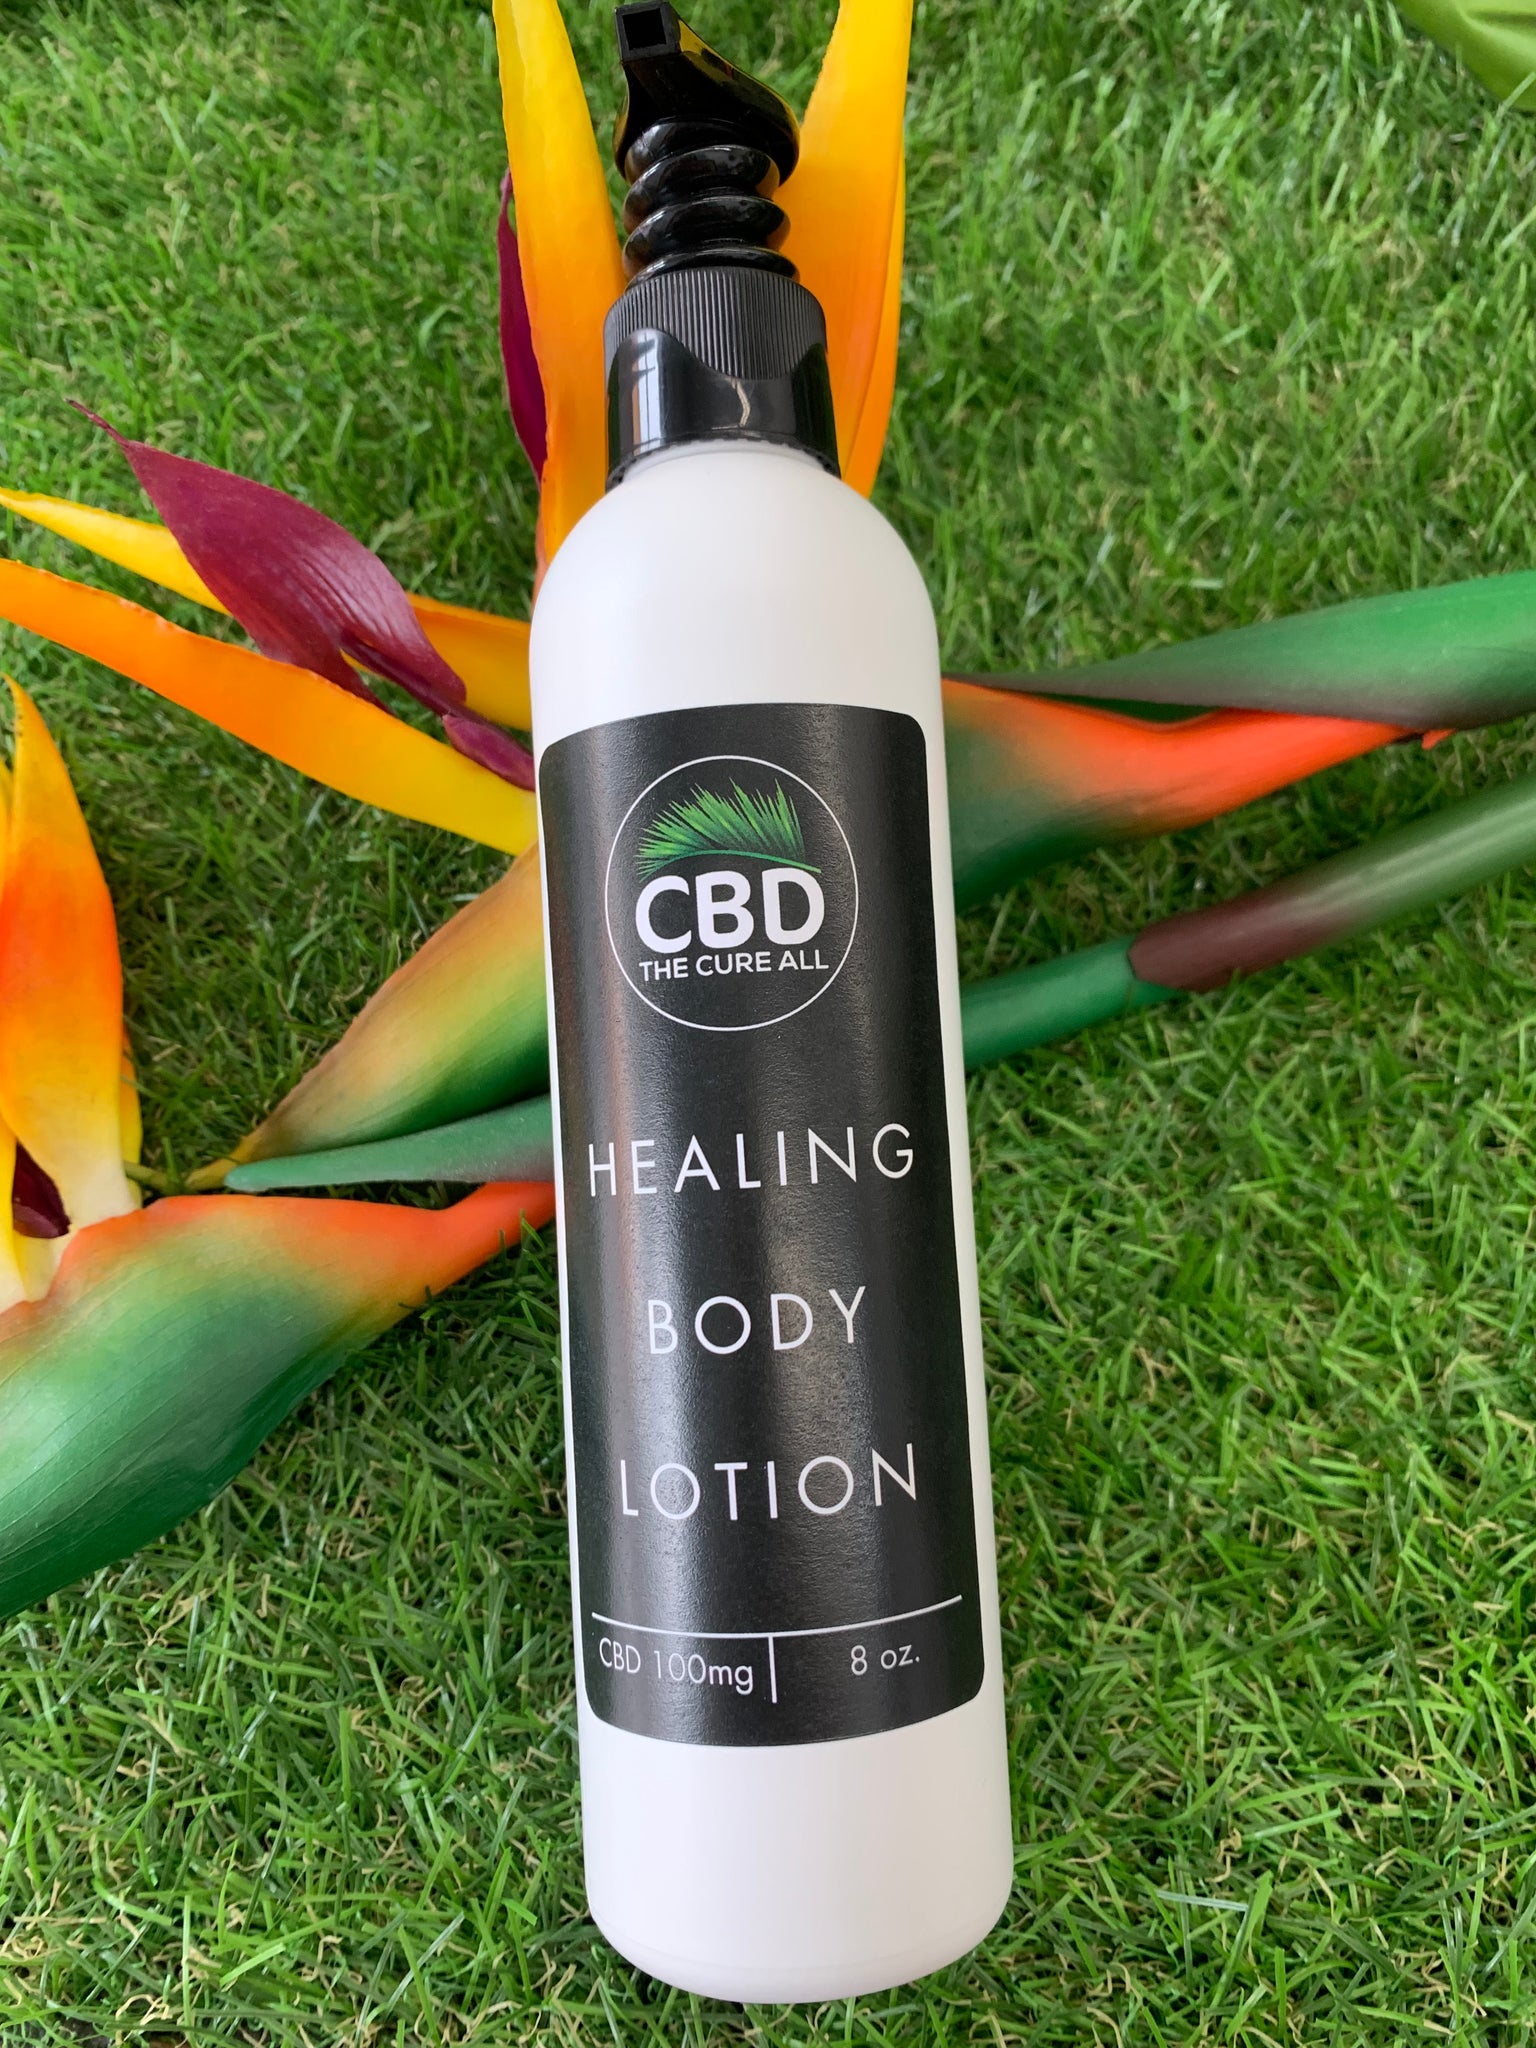 1 TOPICAL CBD HEALING BODY LOTION – The Cure All